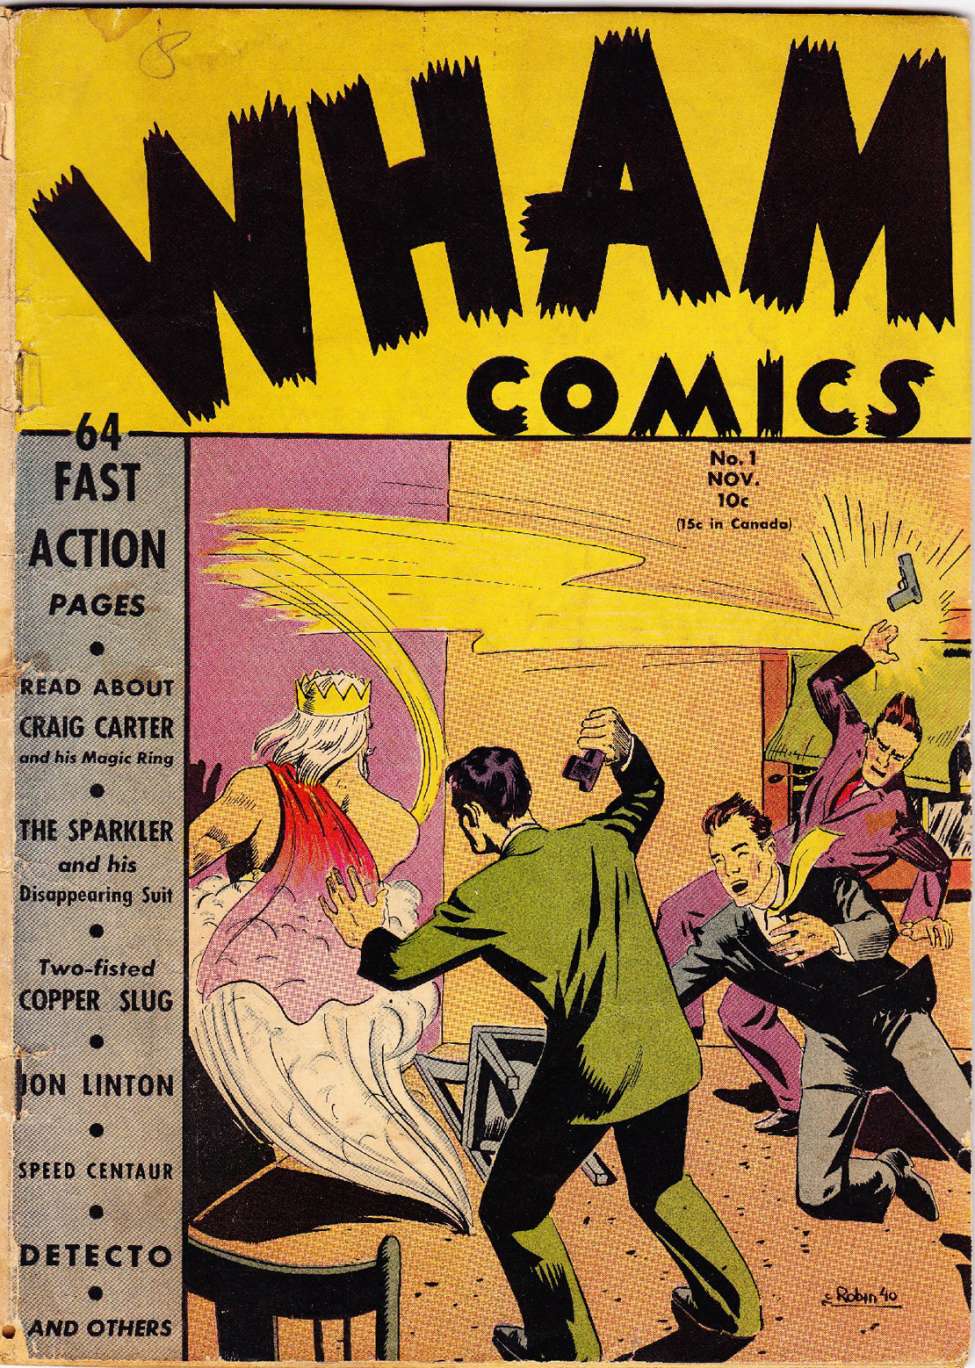 Book Cover For Wham Comics 1 - Version 1